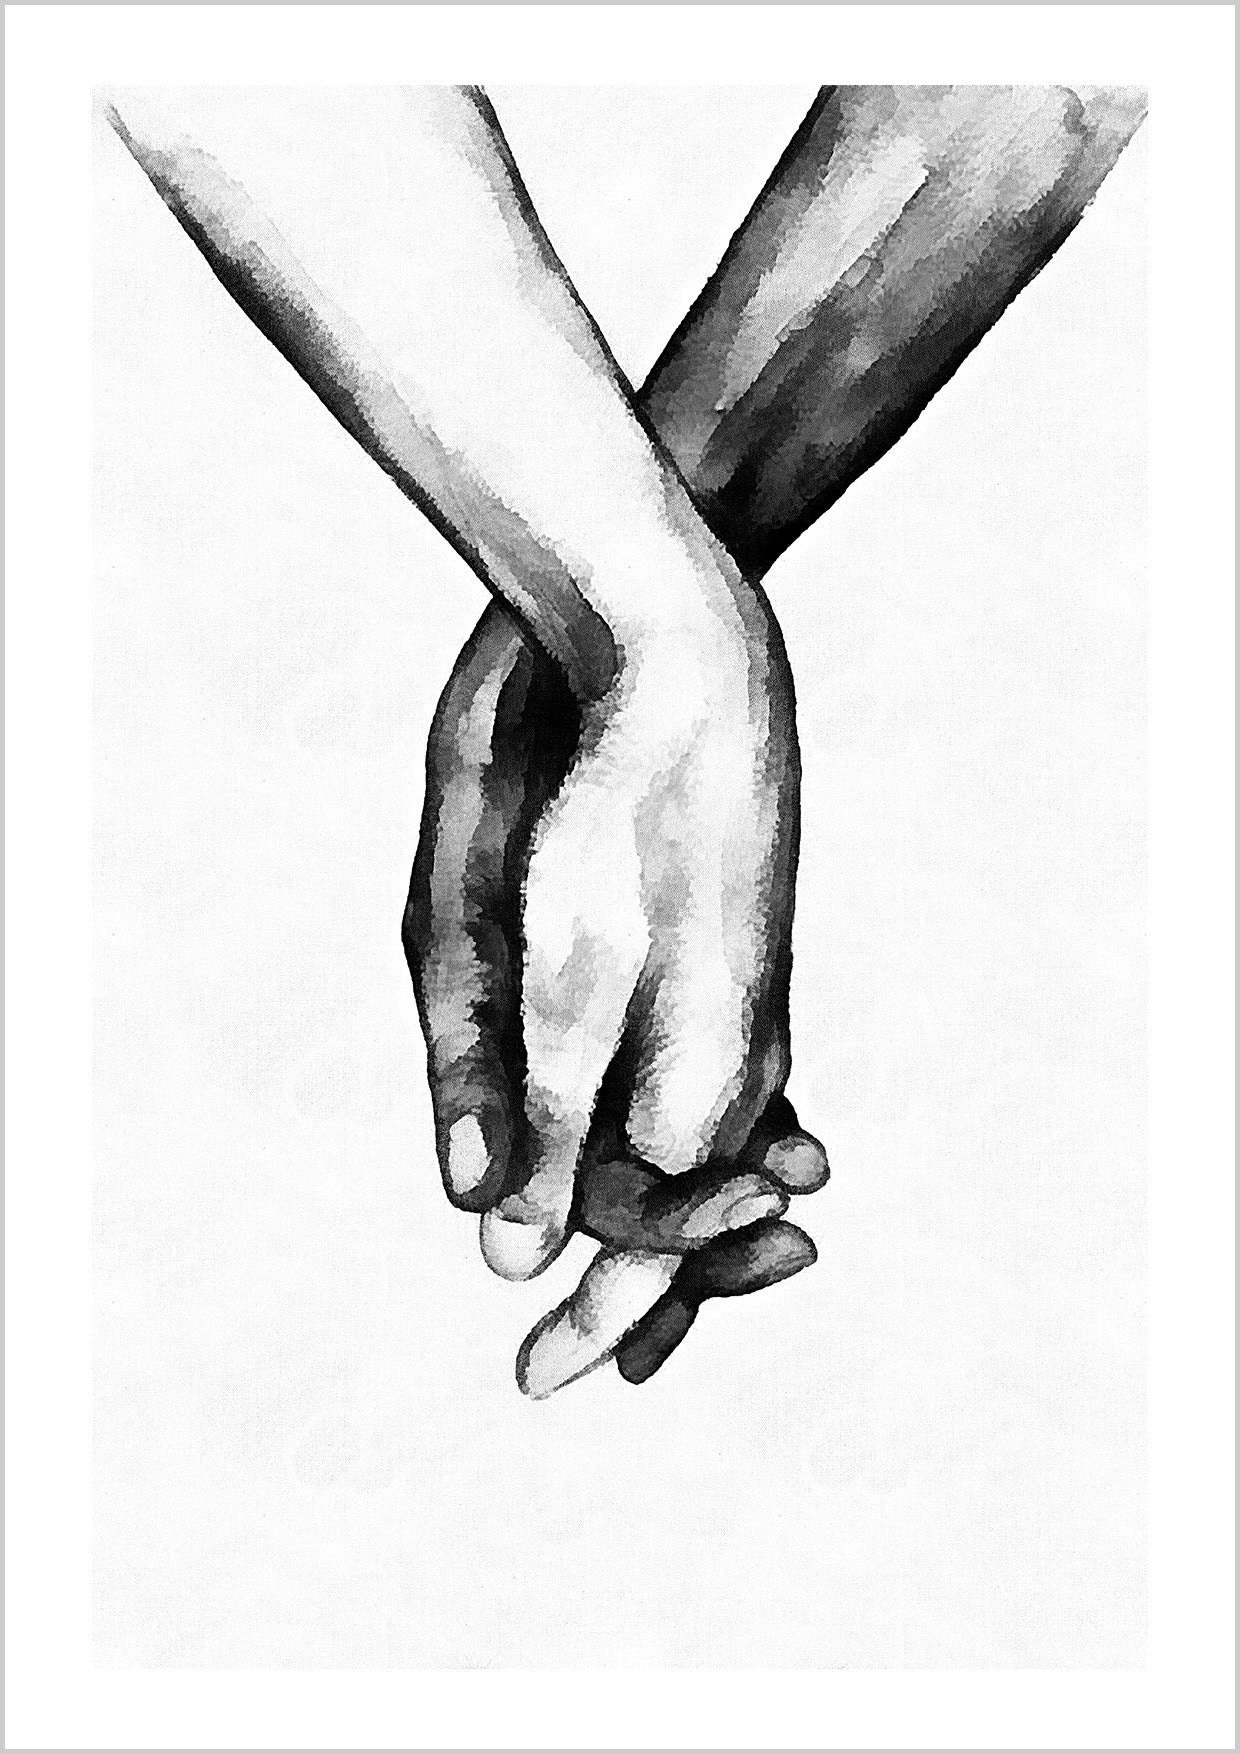 Illustration poster of two hands holding each other. White textured background.